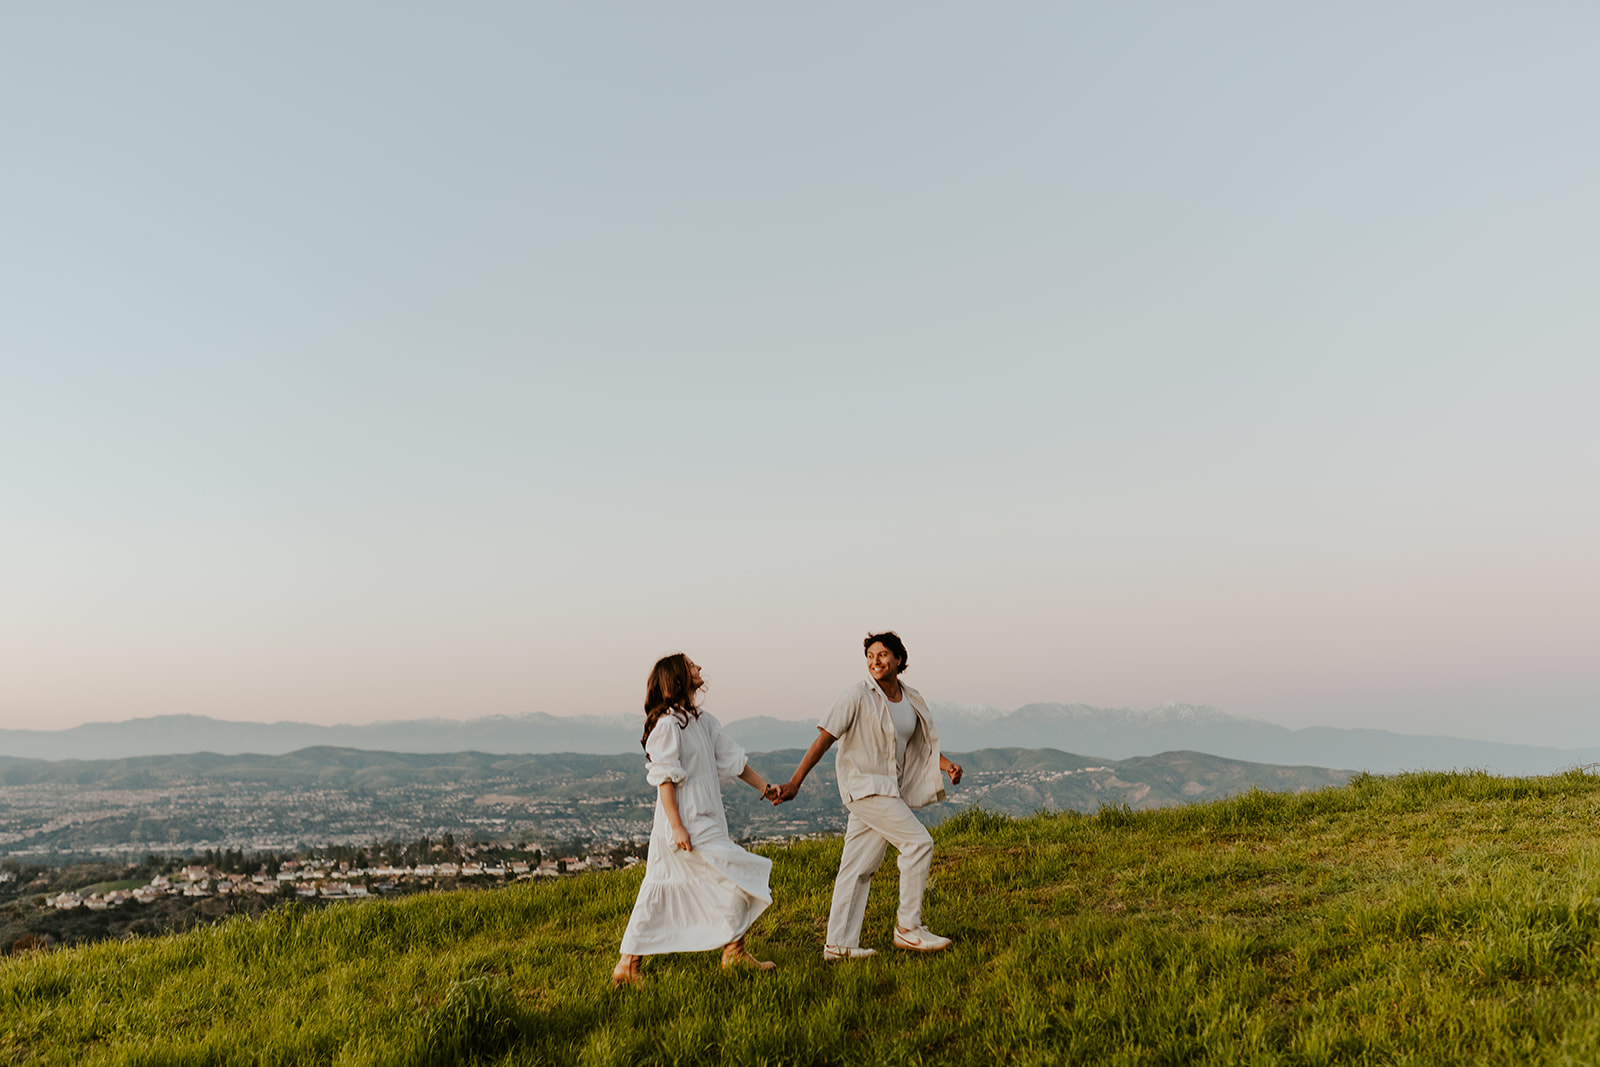 A couple in linen clothes walks at sunset in the California hills.